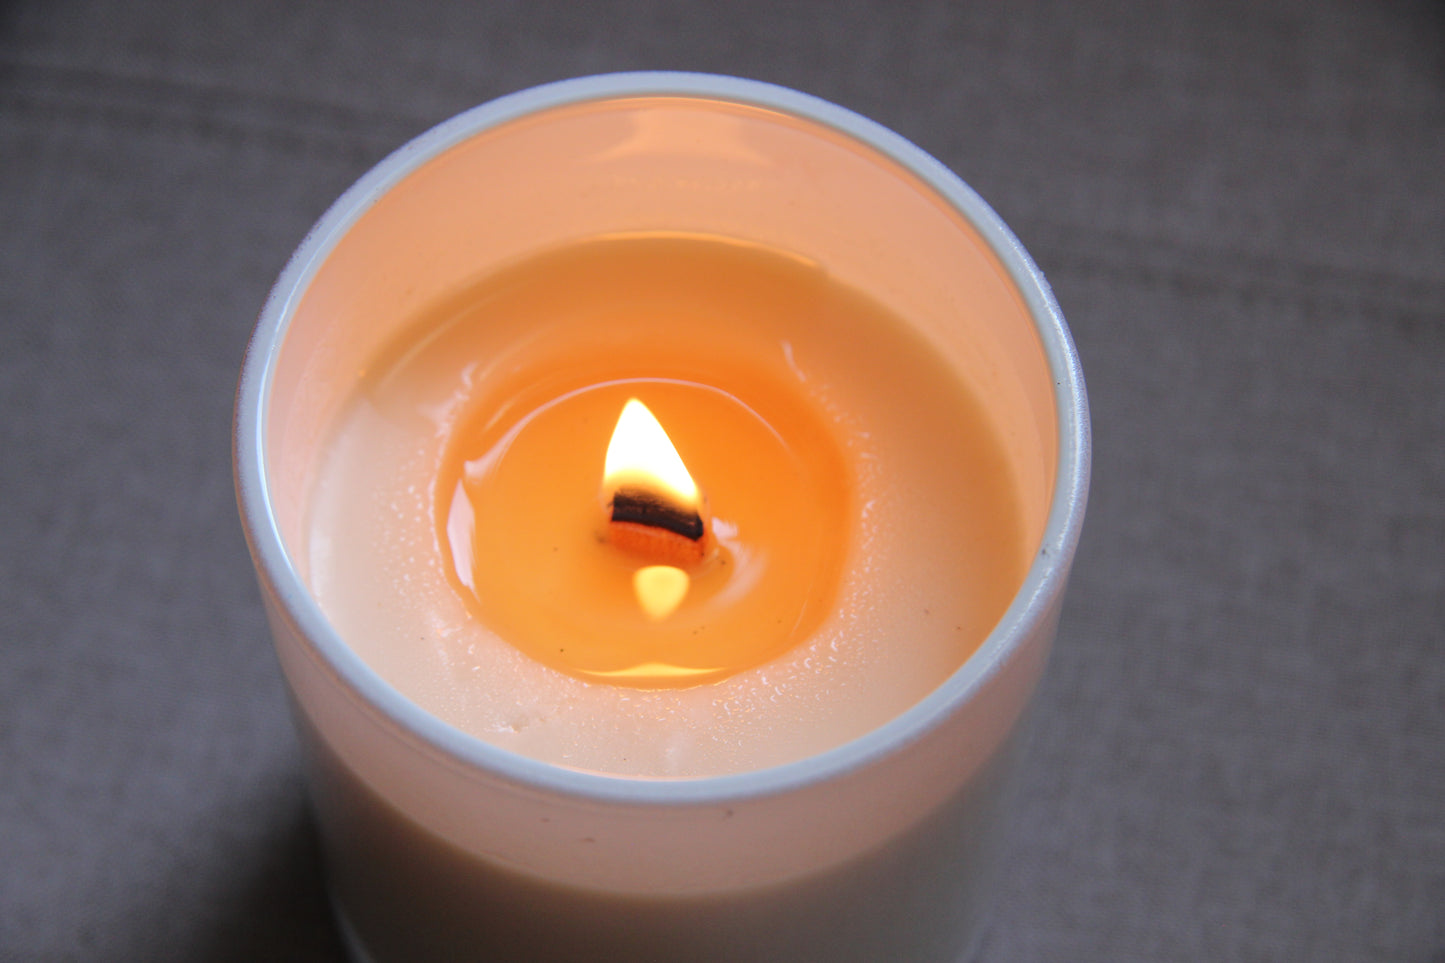 Toasted Pumpkin Refillable Wood Wick Candle